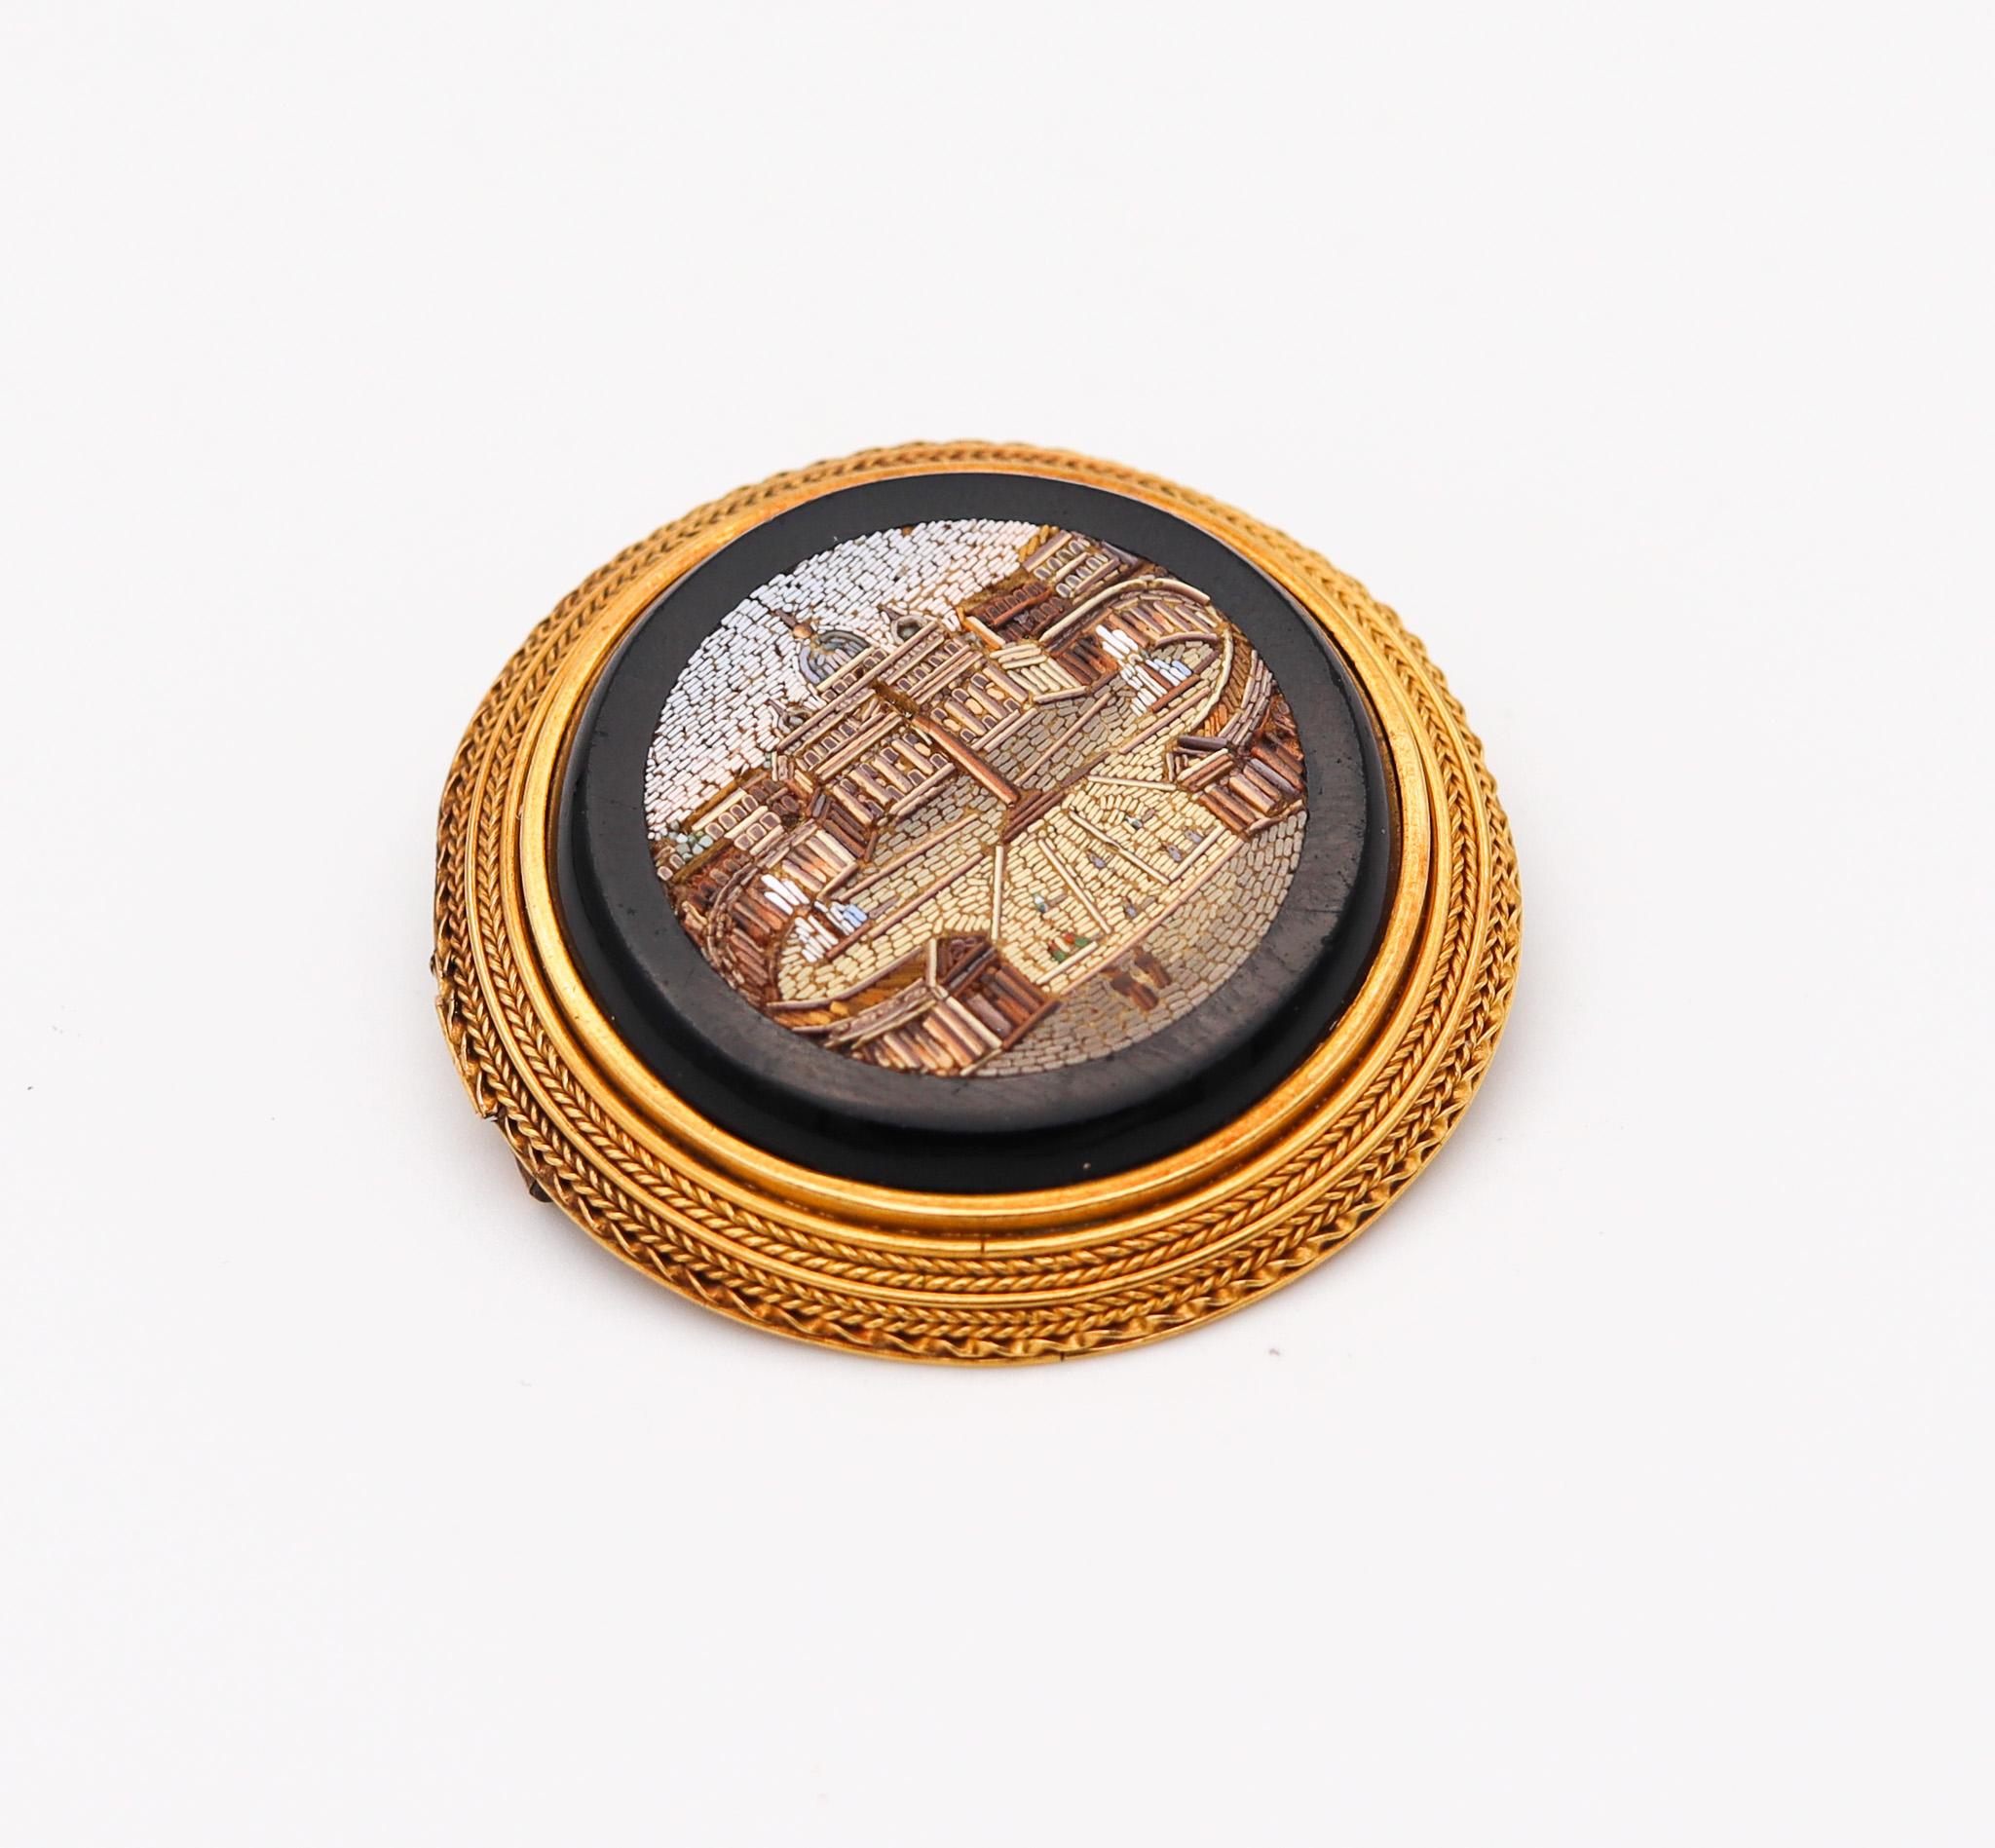 A Roman revival grand tour brooch.

An exceptional historical piece, created in the Victorian Grand Tour era in Rome Italy during the Papal States period, back in the 1850. It was carefully crafted with Roman-Etruscan revival patterns in solid rich